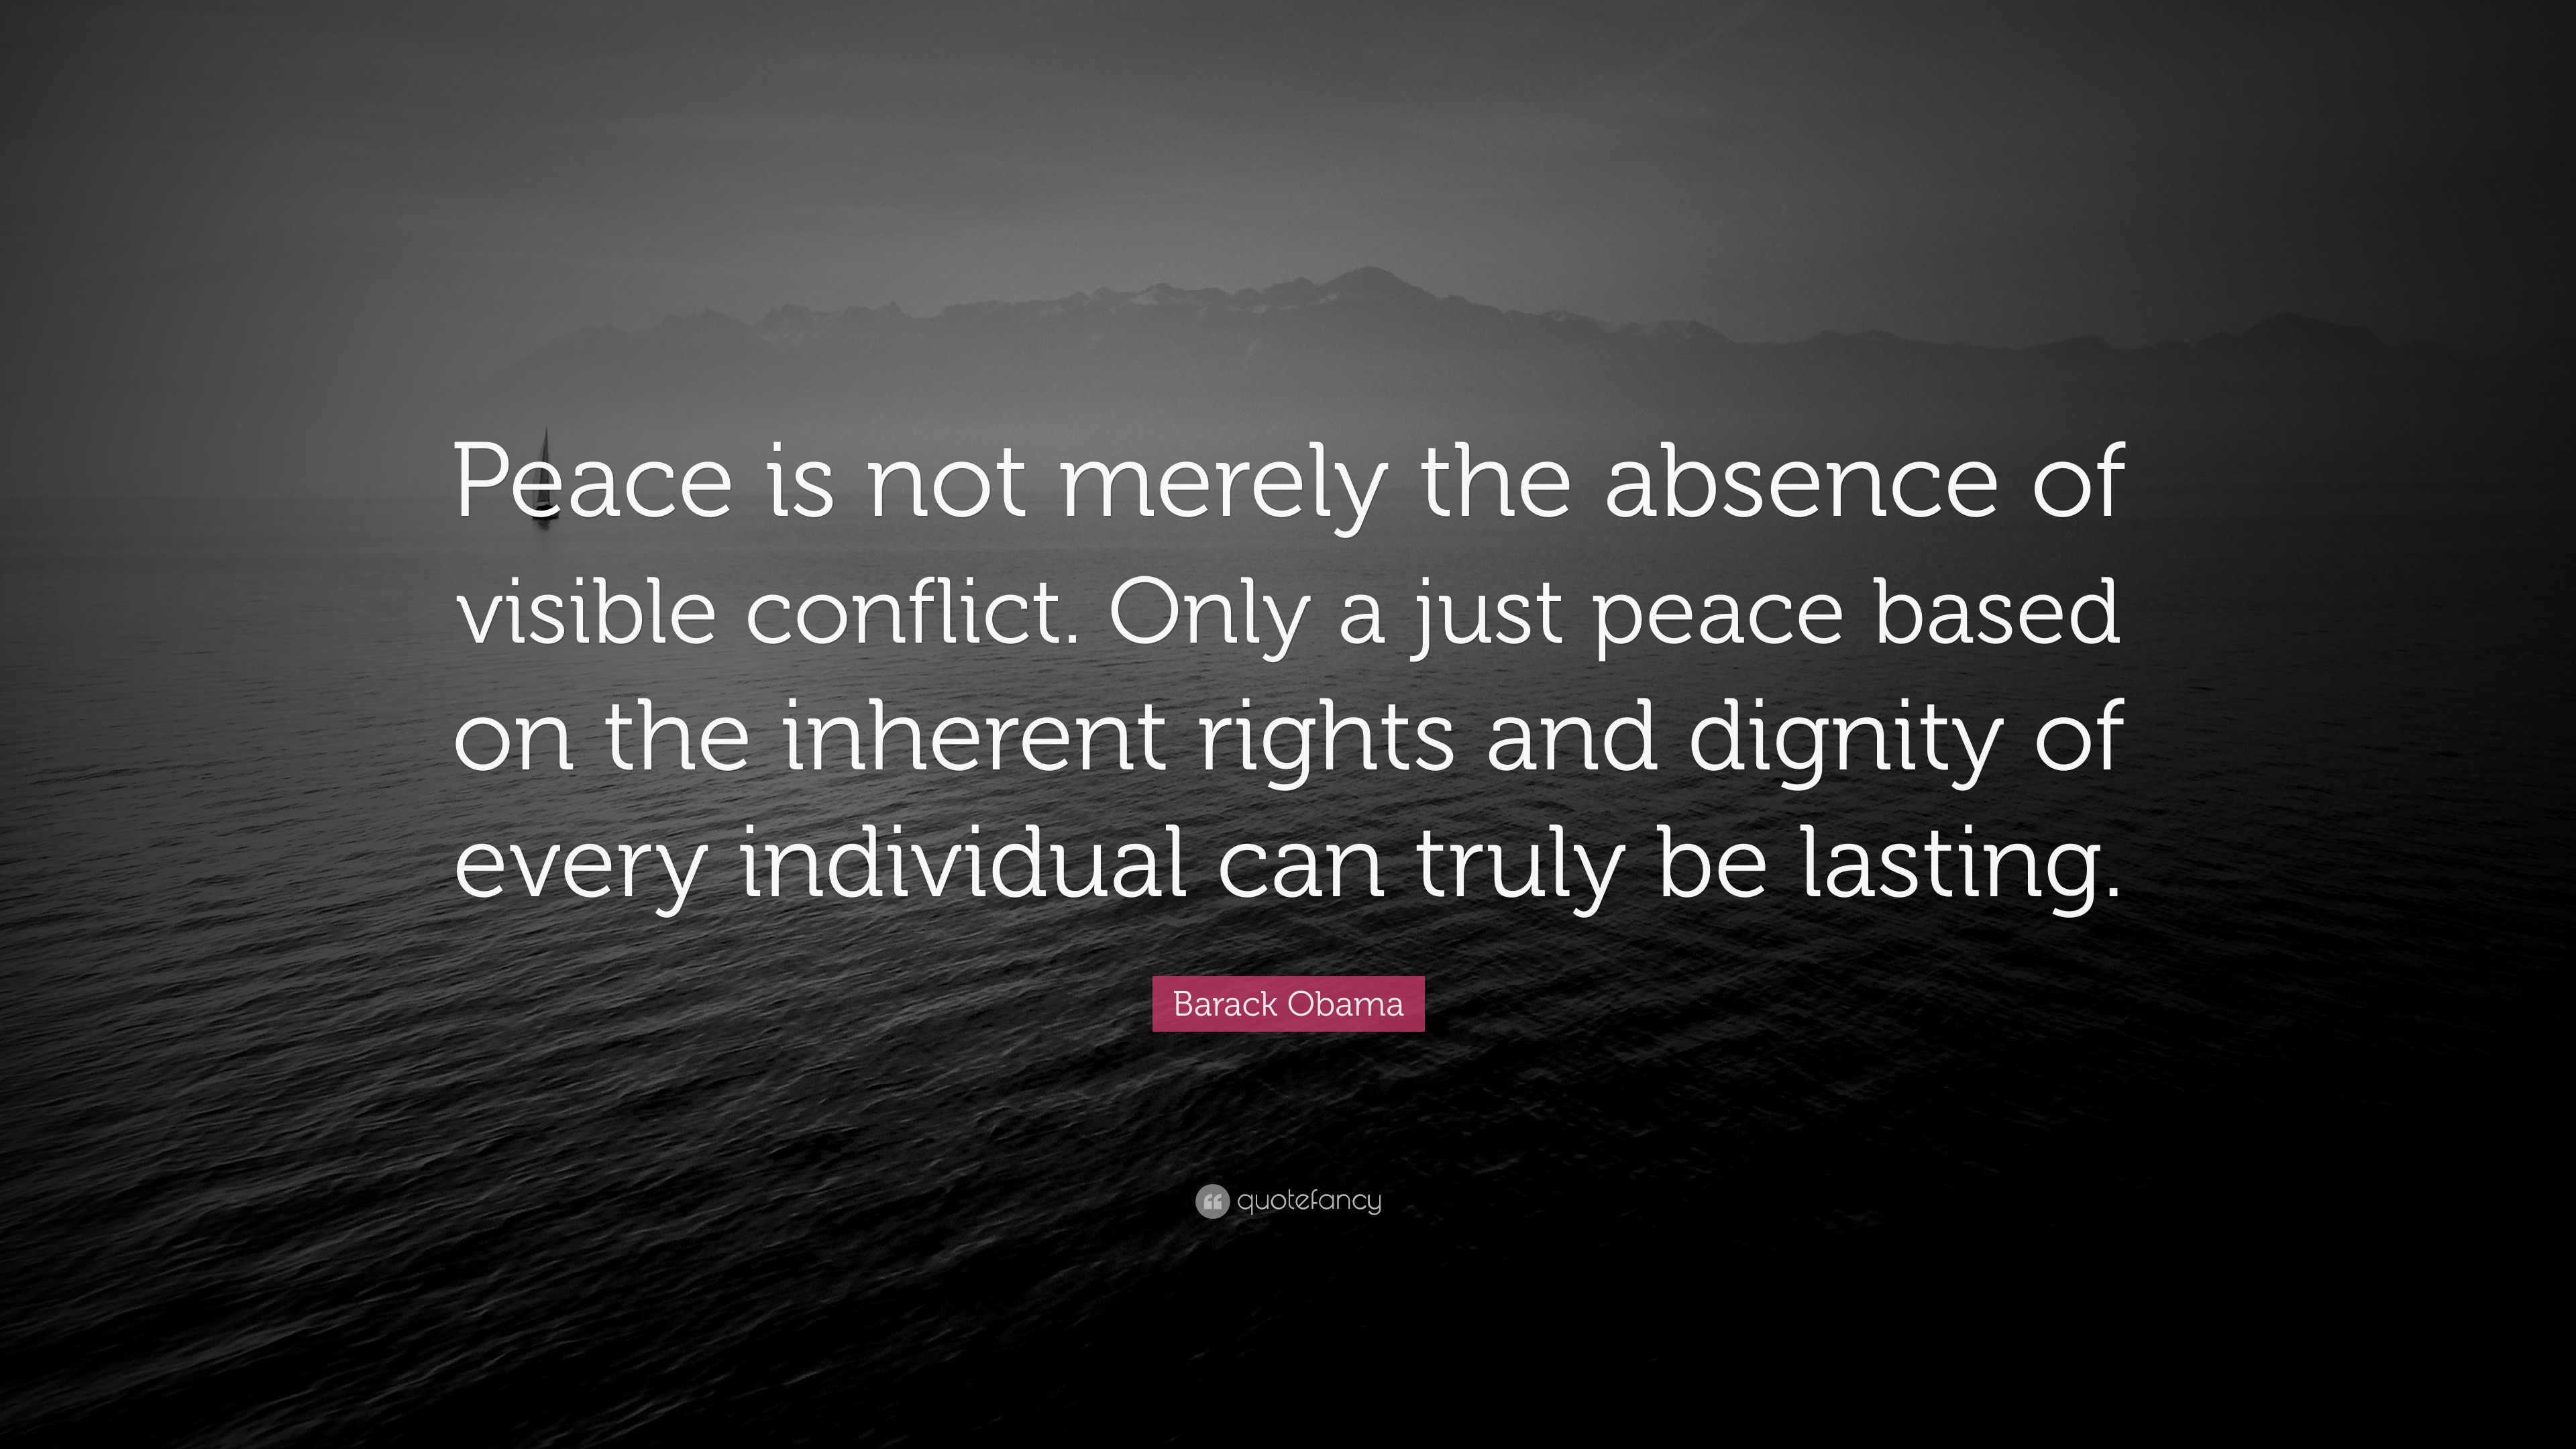 quote peace is not the absence of conflict